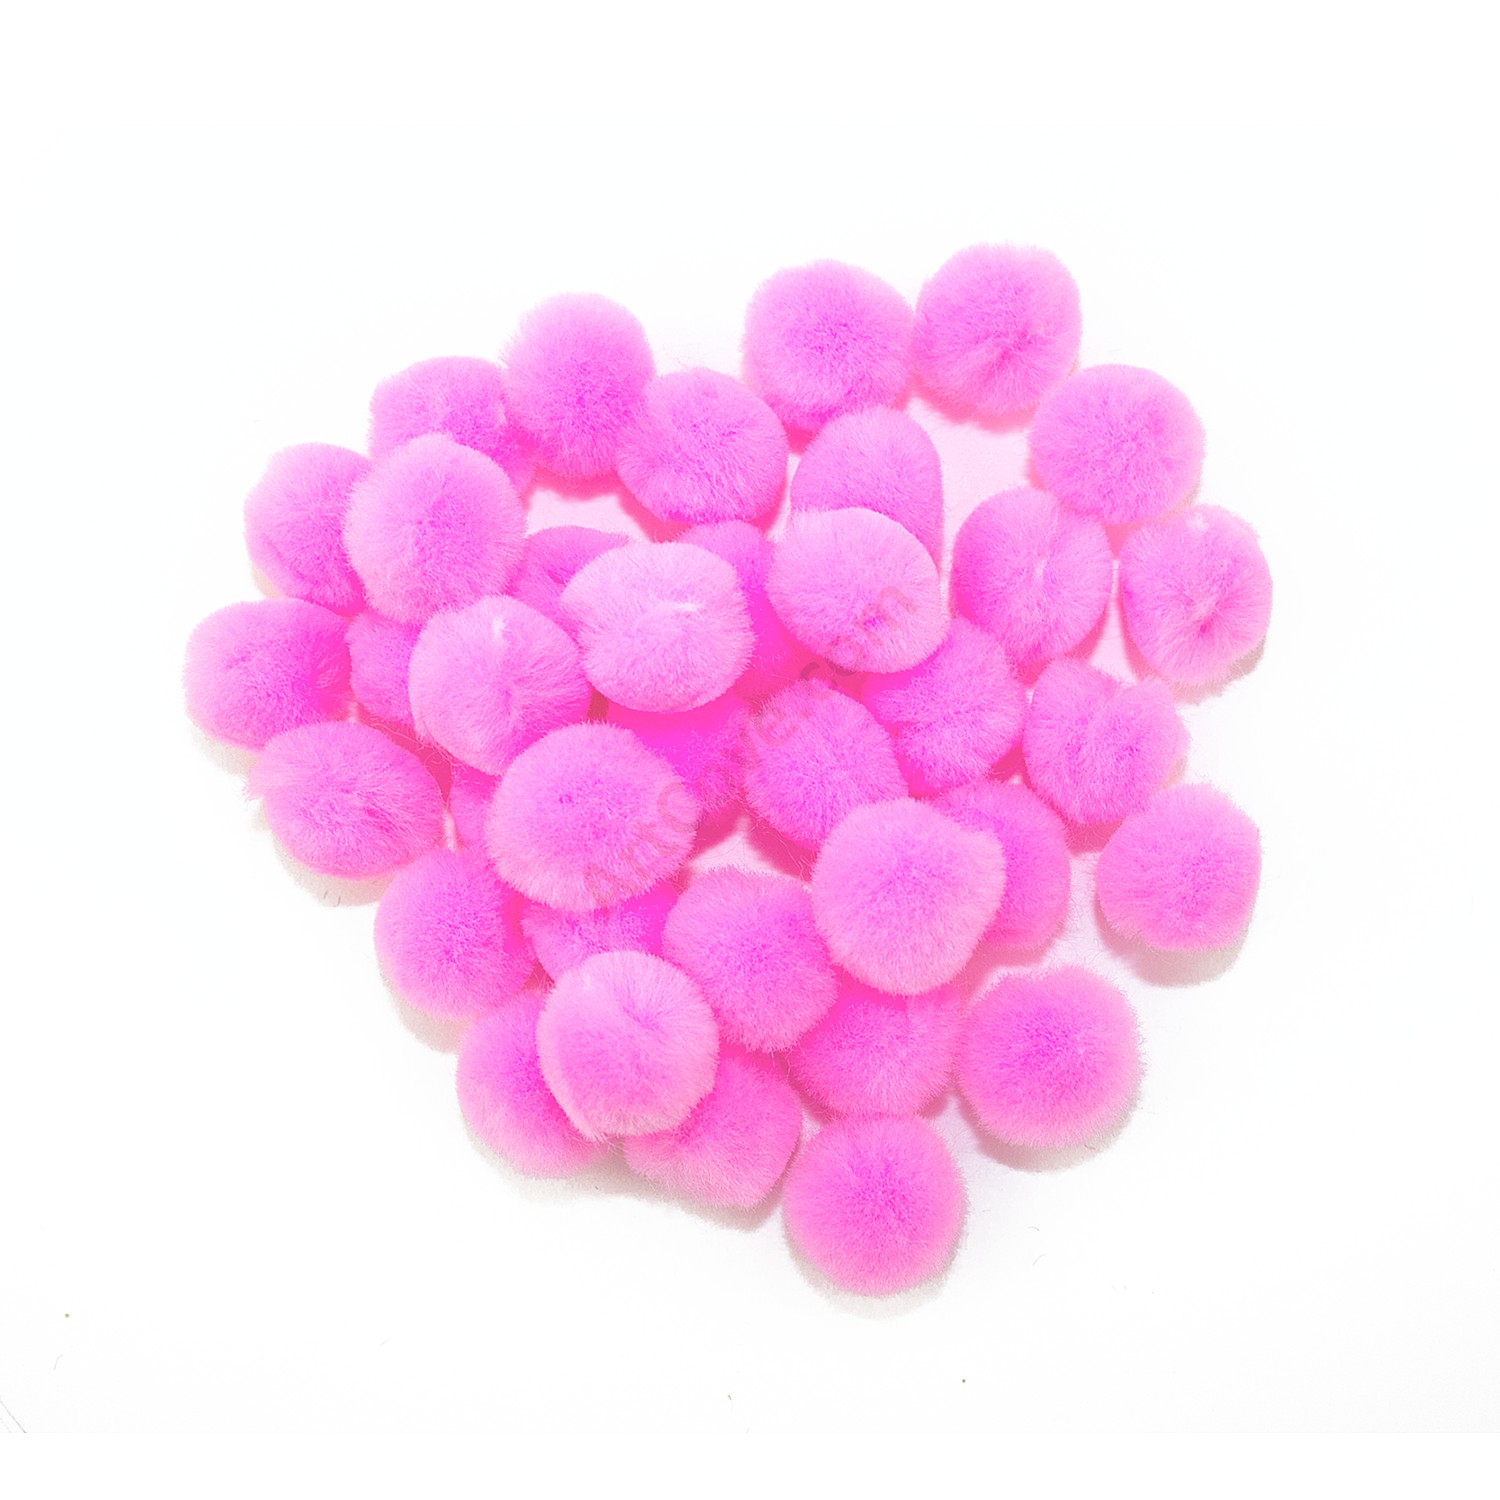 Premium Photo  Top view of colorful pom pom balls forming a square shape  on pink background